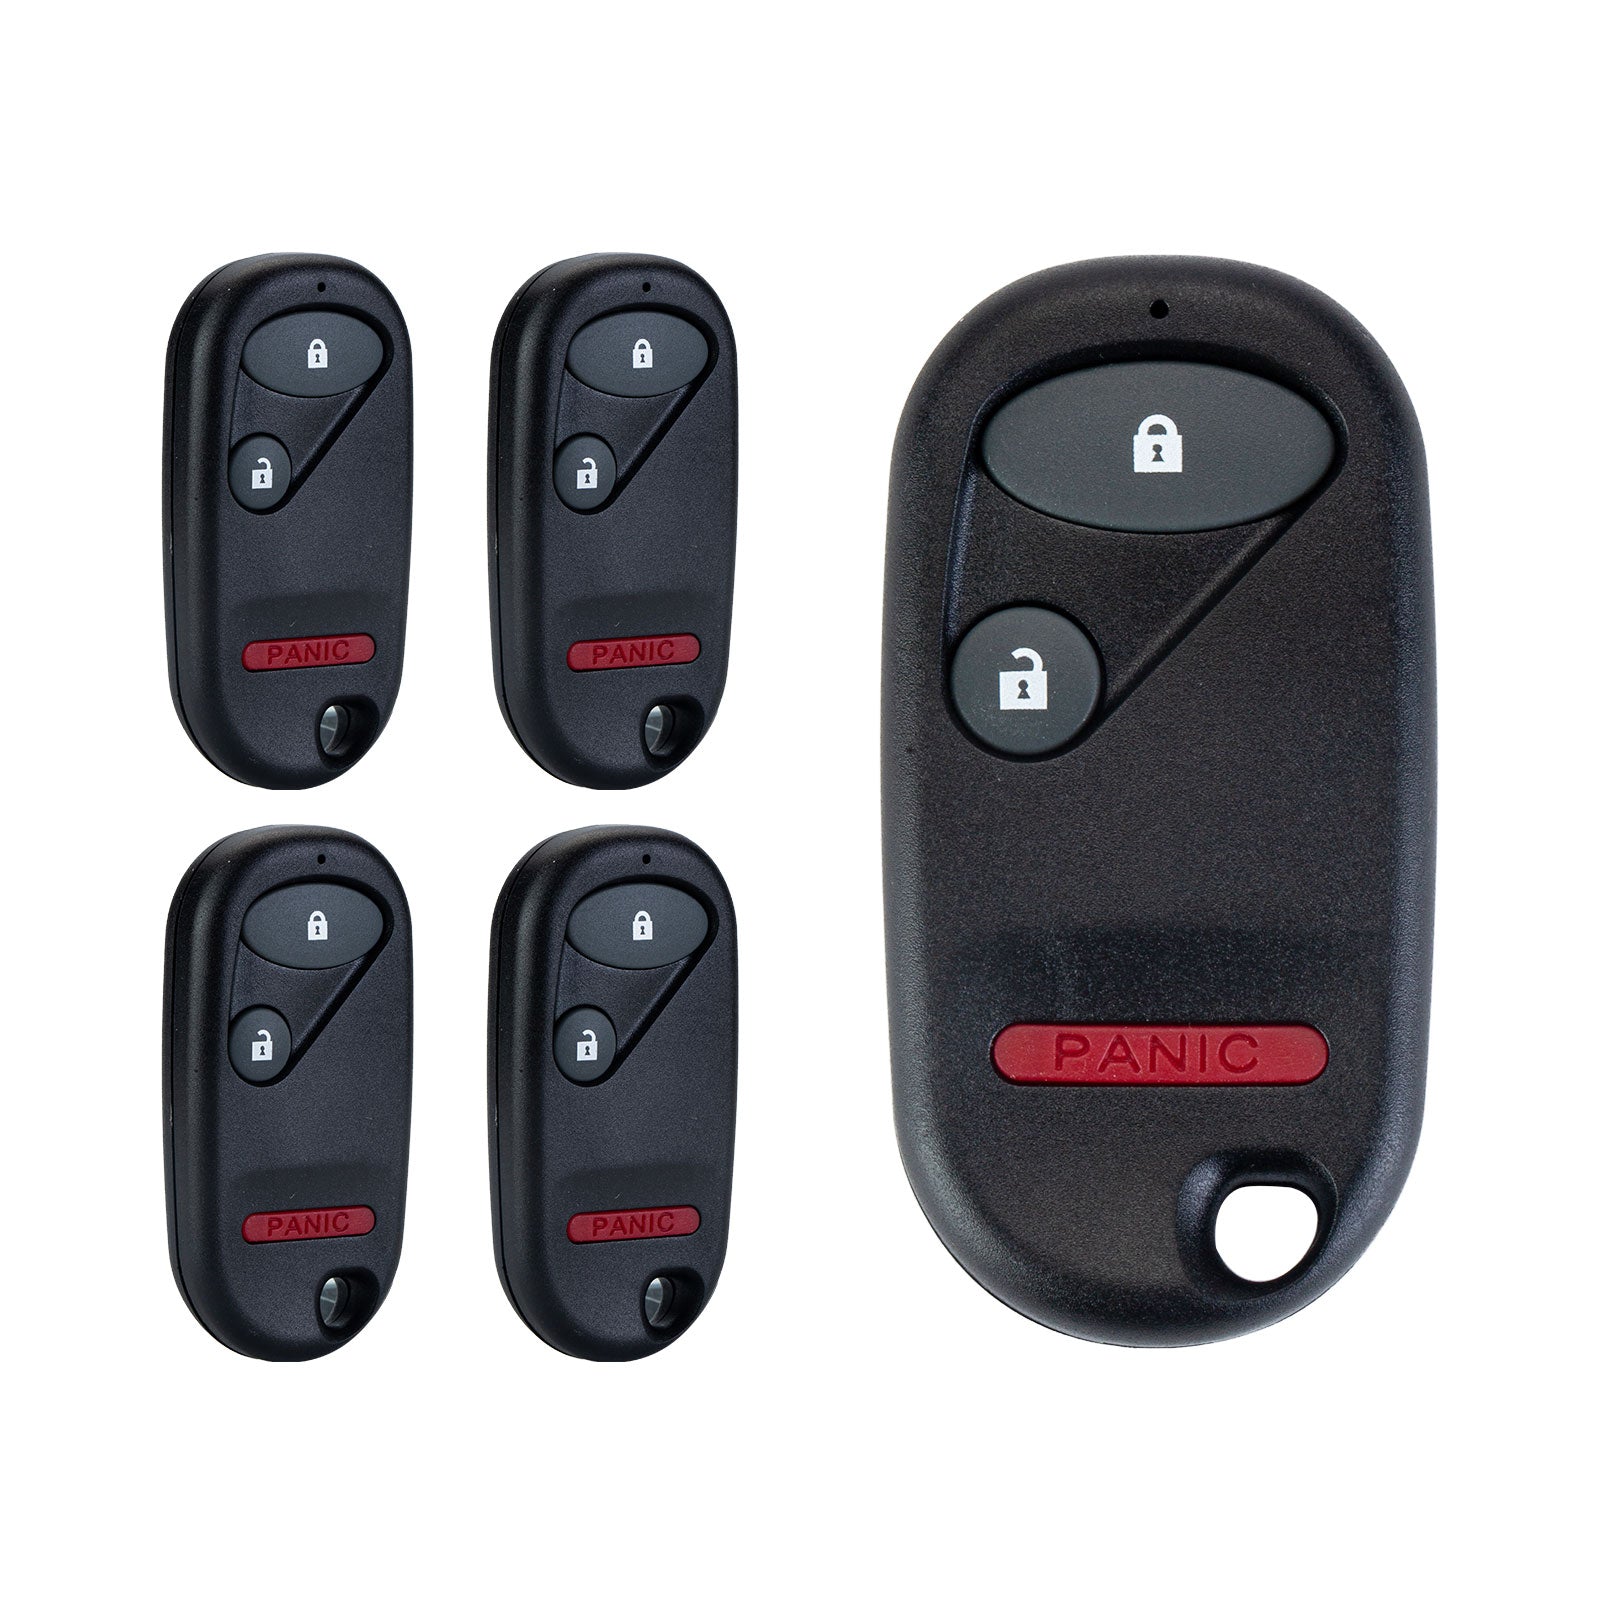 Keyless Entry Remote Control with Uncut High Security Car Key Fob Repalcement for 2002 2003 2004 Honda CR-V OUCG8D-344H-A  KR-H3RA